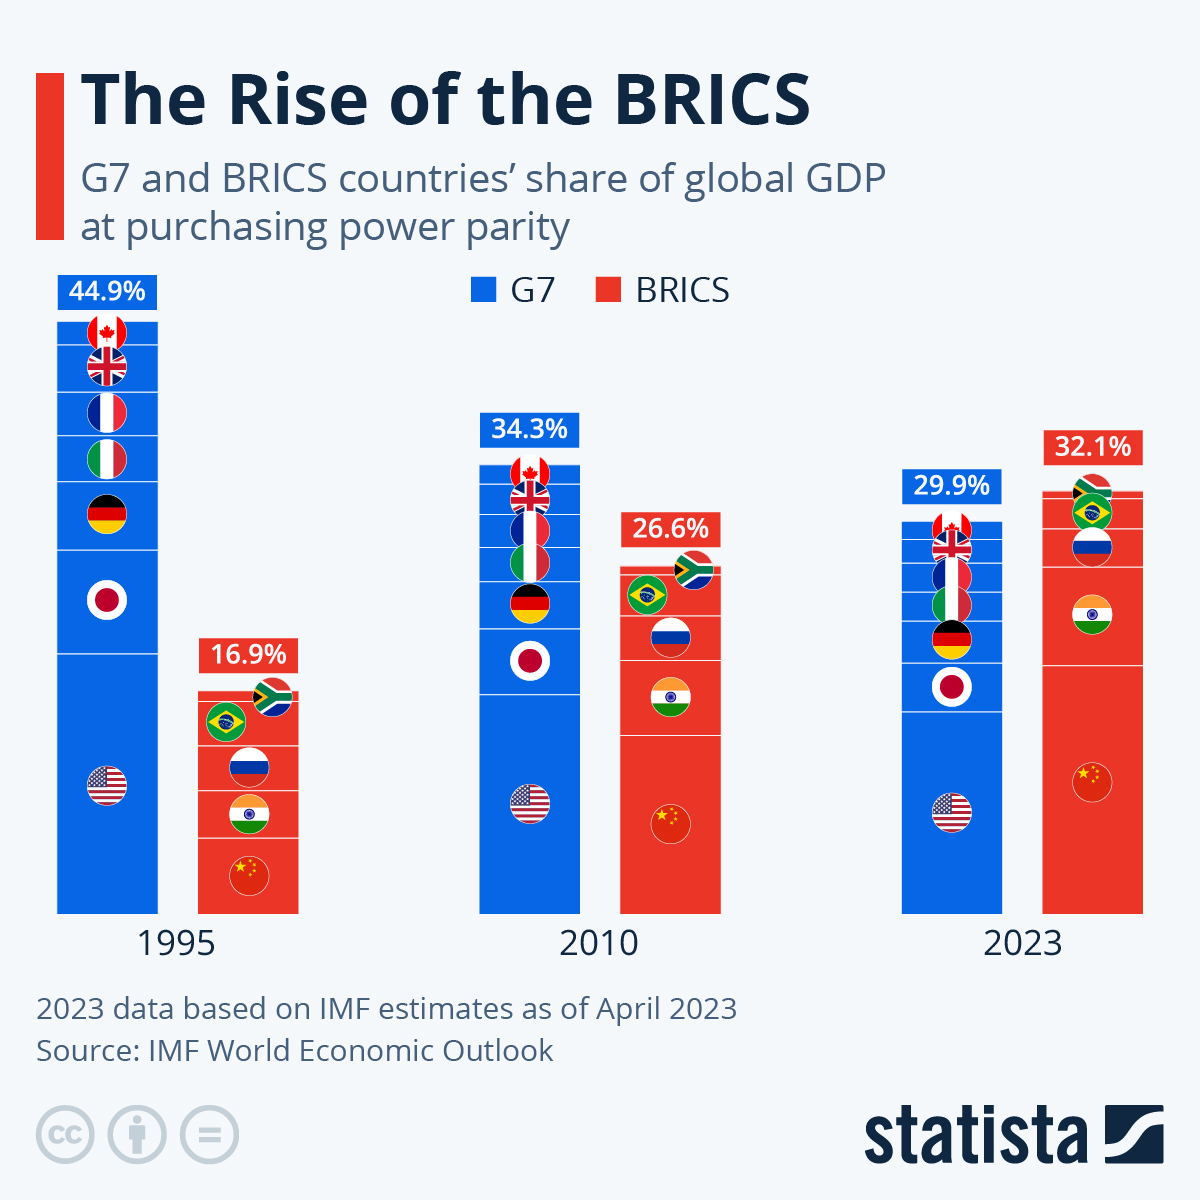 The rise of the brics